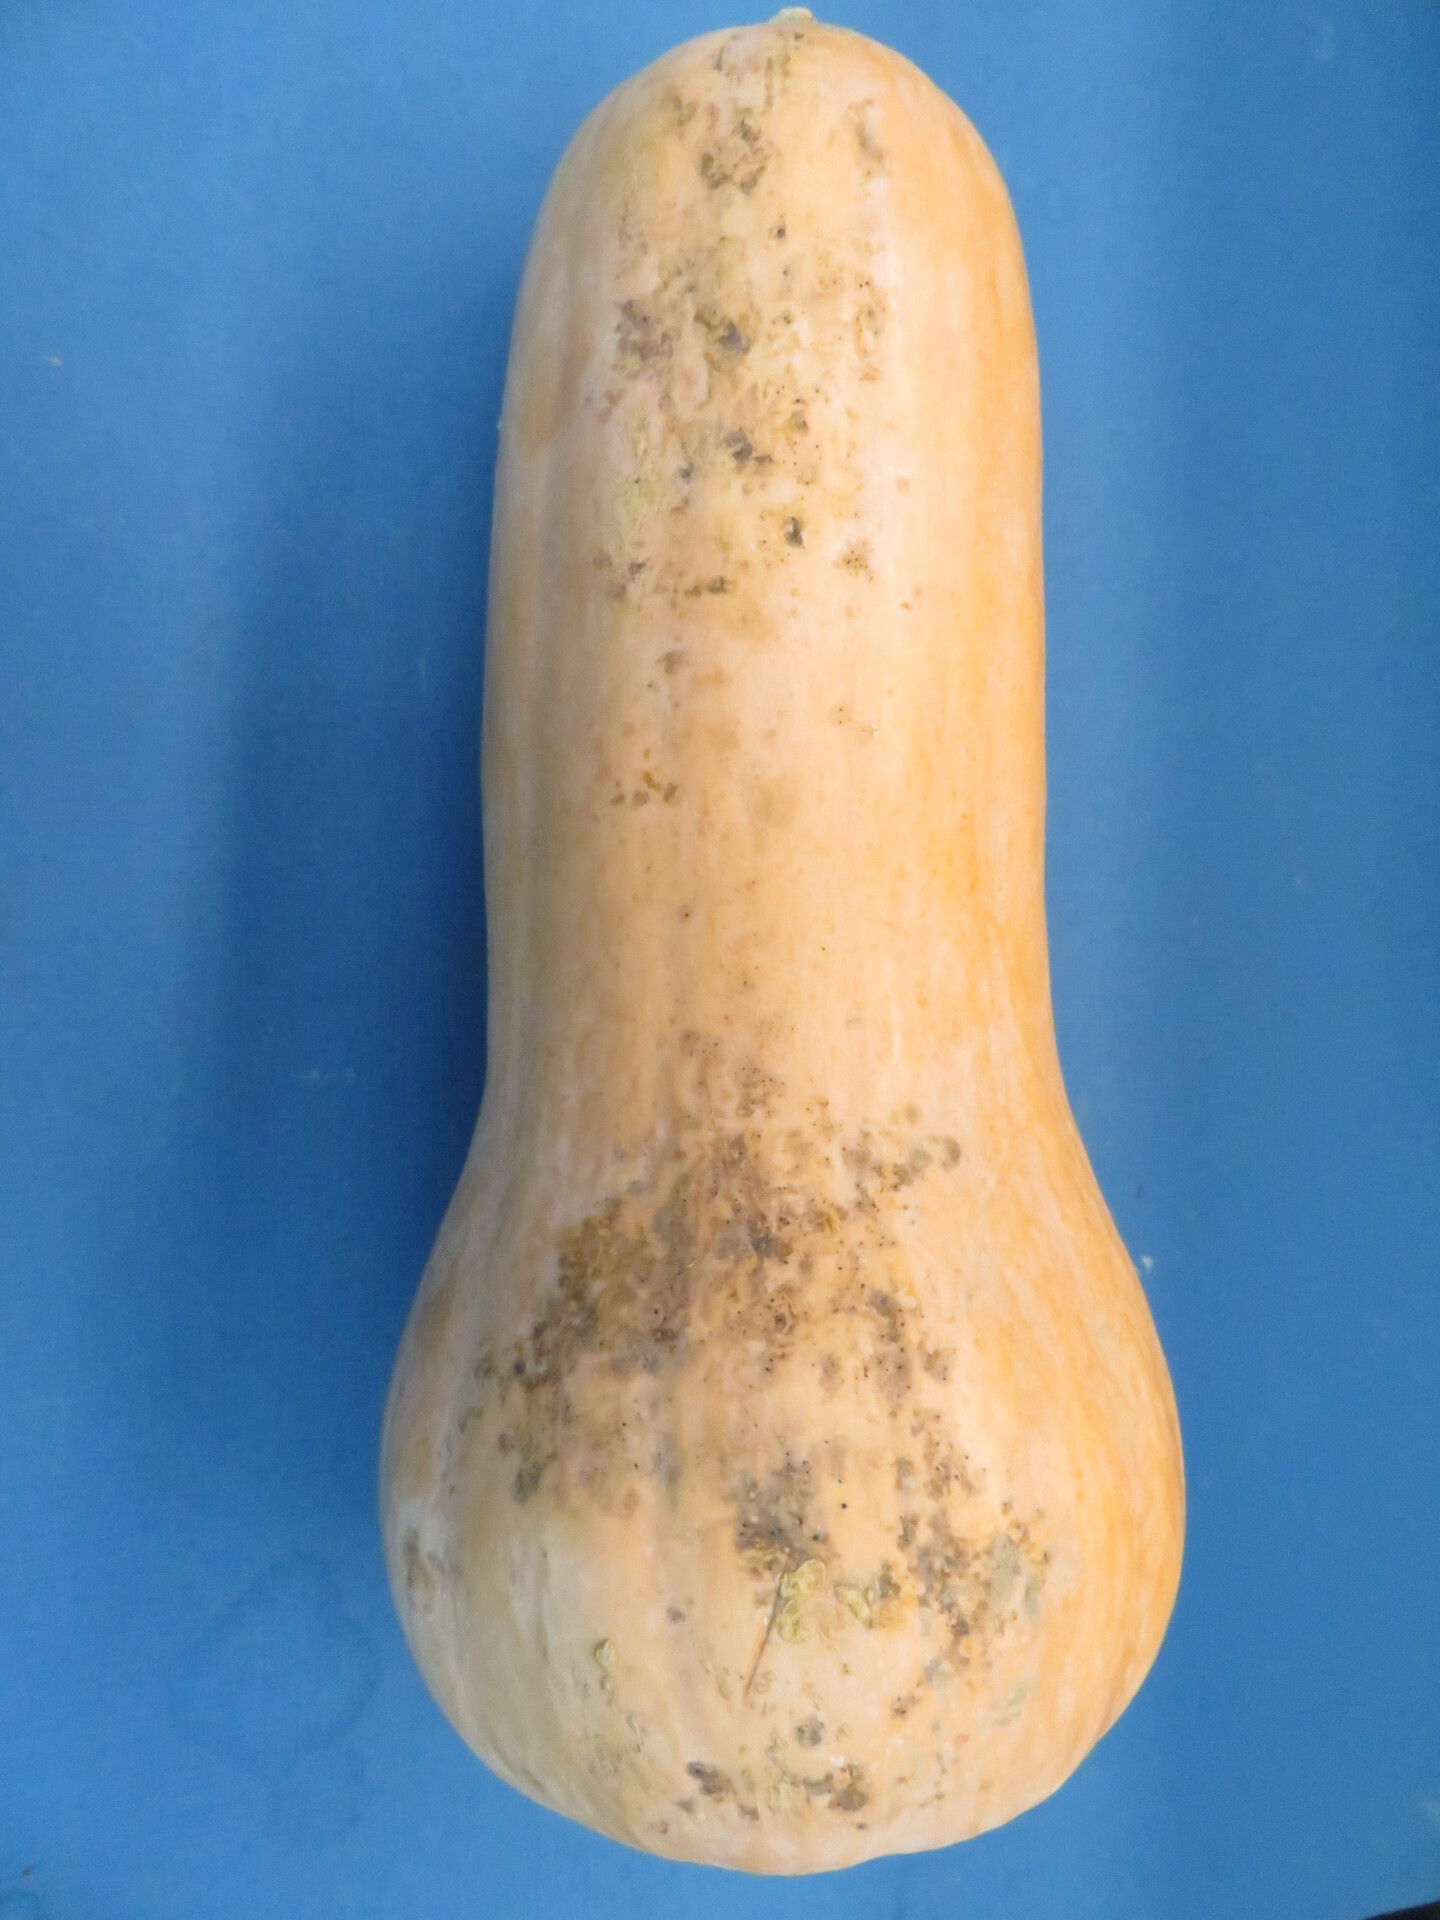 Figure 2. Sooty mold and fly speck on squash.